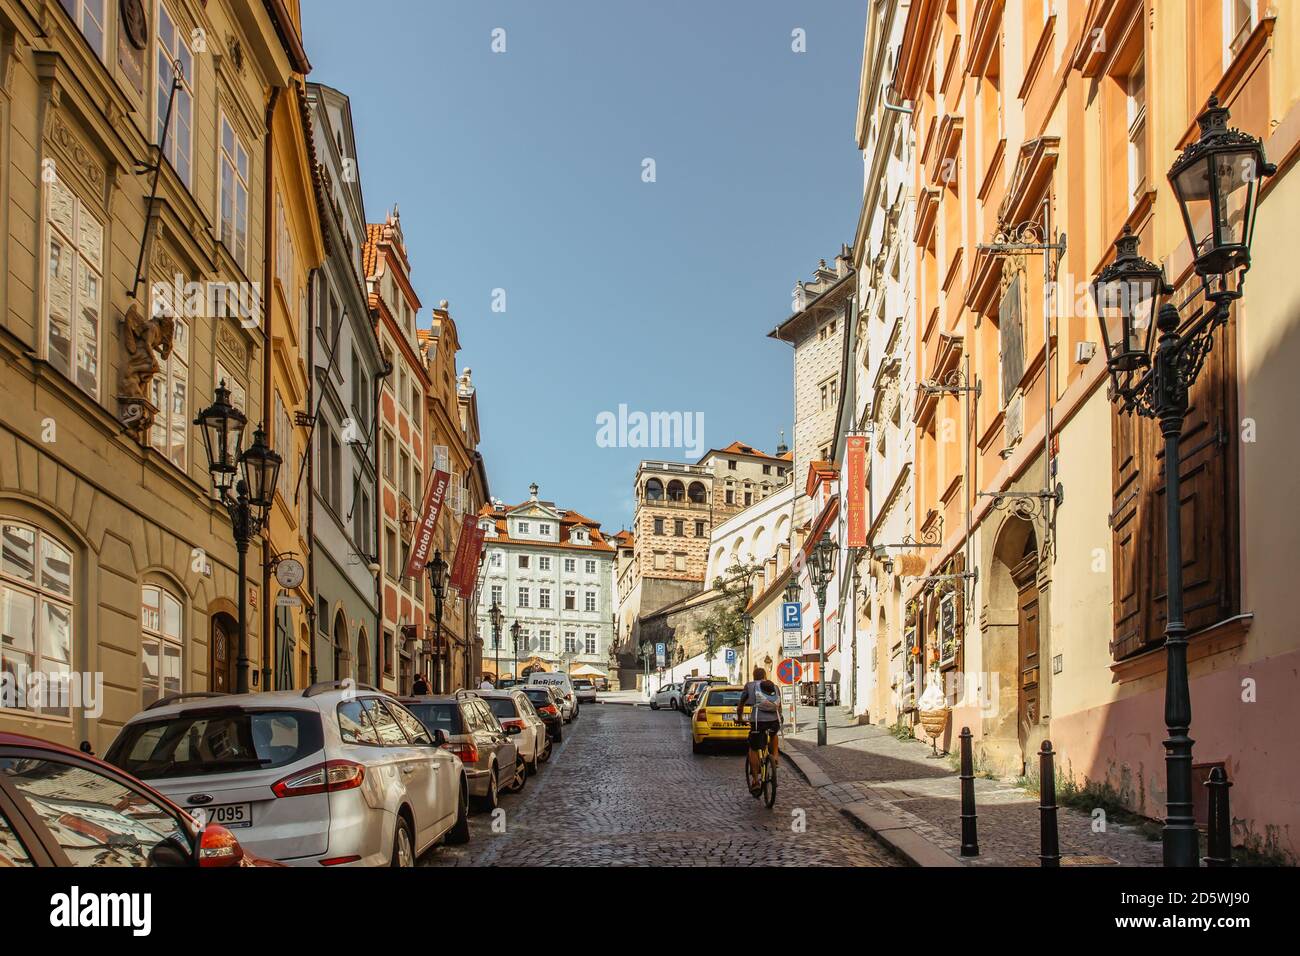 Prague, Czech Republic - September 16, 2020. Empty colorful streets of Czech capital. No tourists during COVID 19 quarantine. Historical center withou Stock Photo